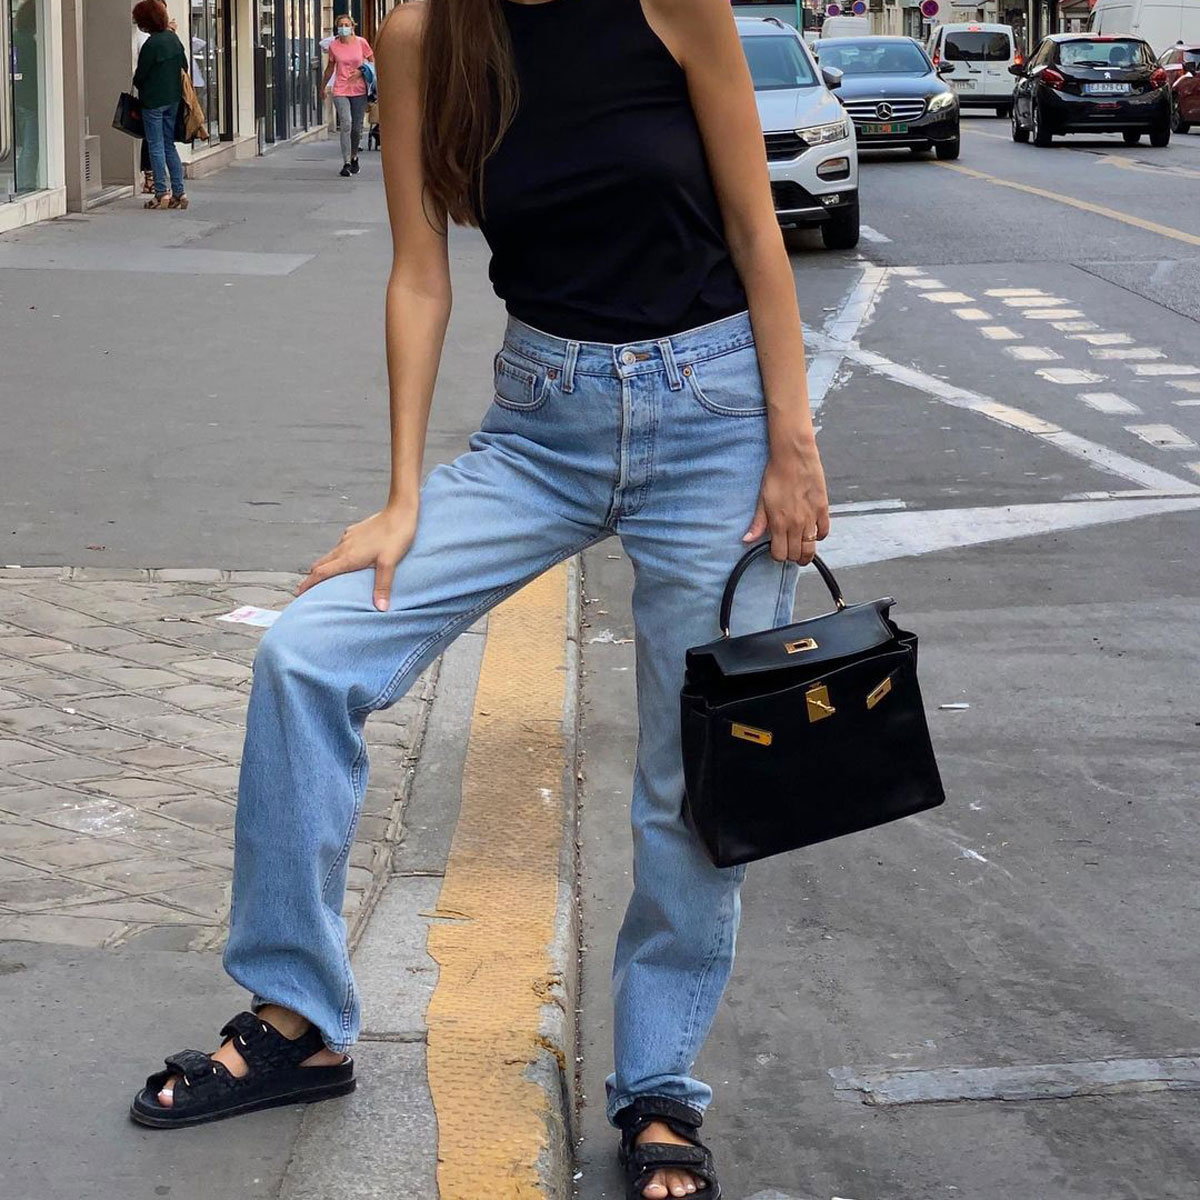 31 Full-Length Jeans That Are Perfect for Tall Women